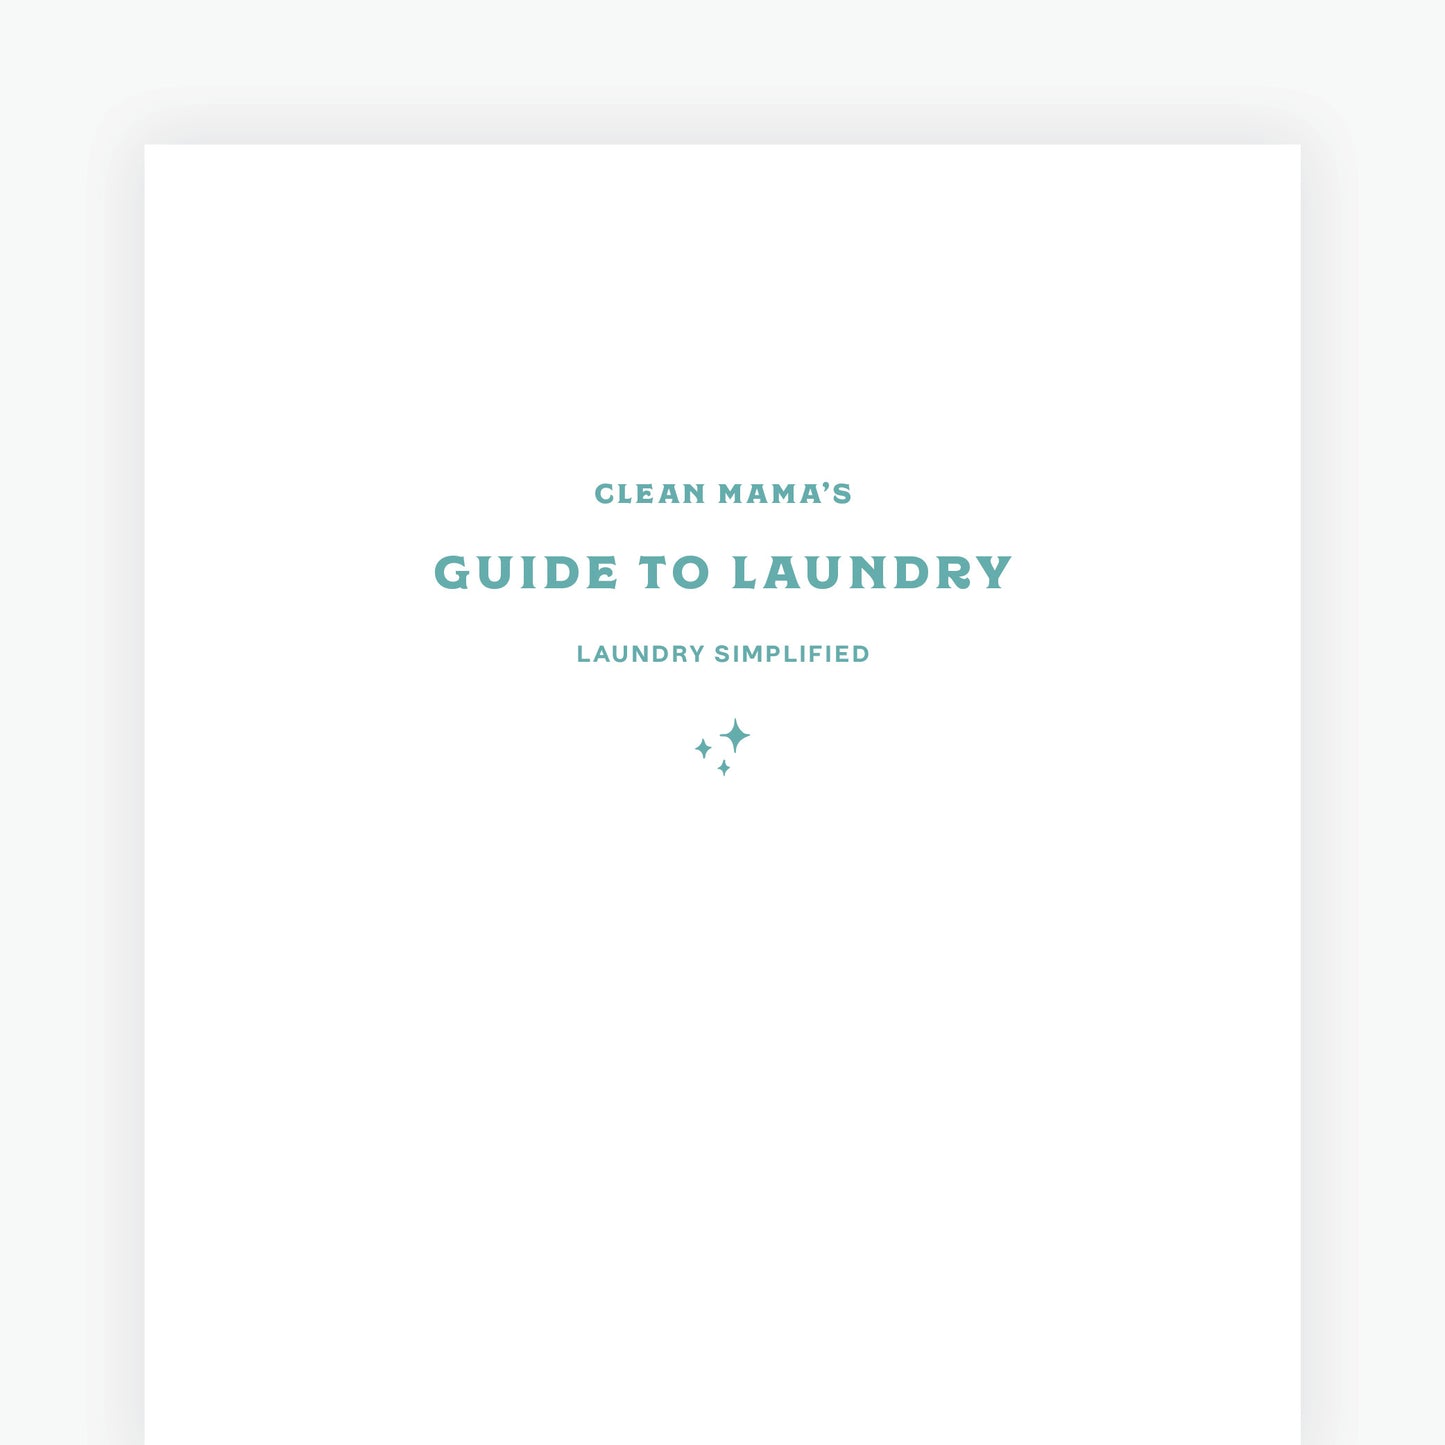 Guide to Laundry